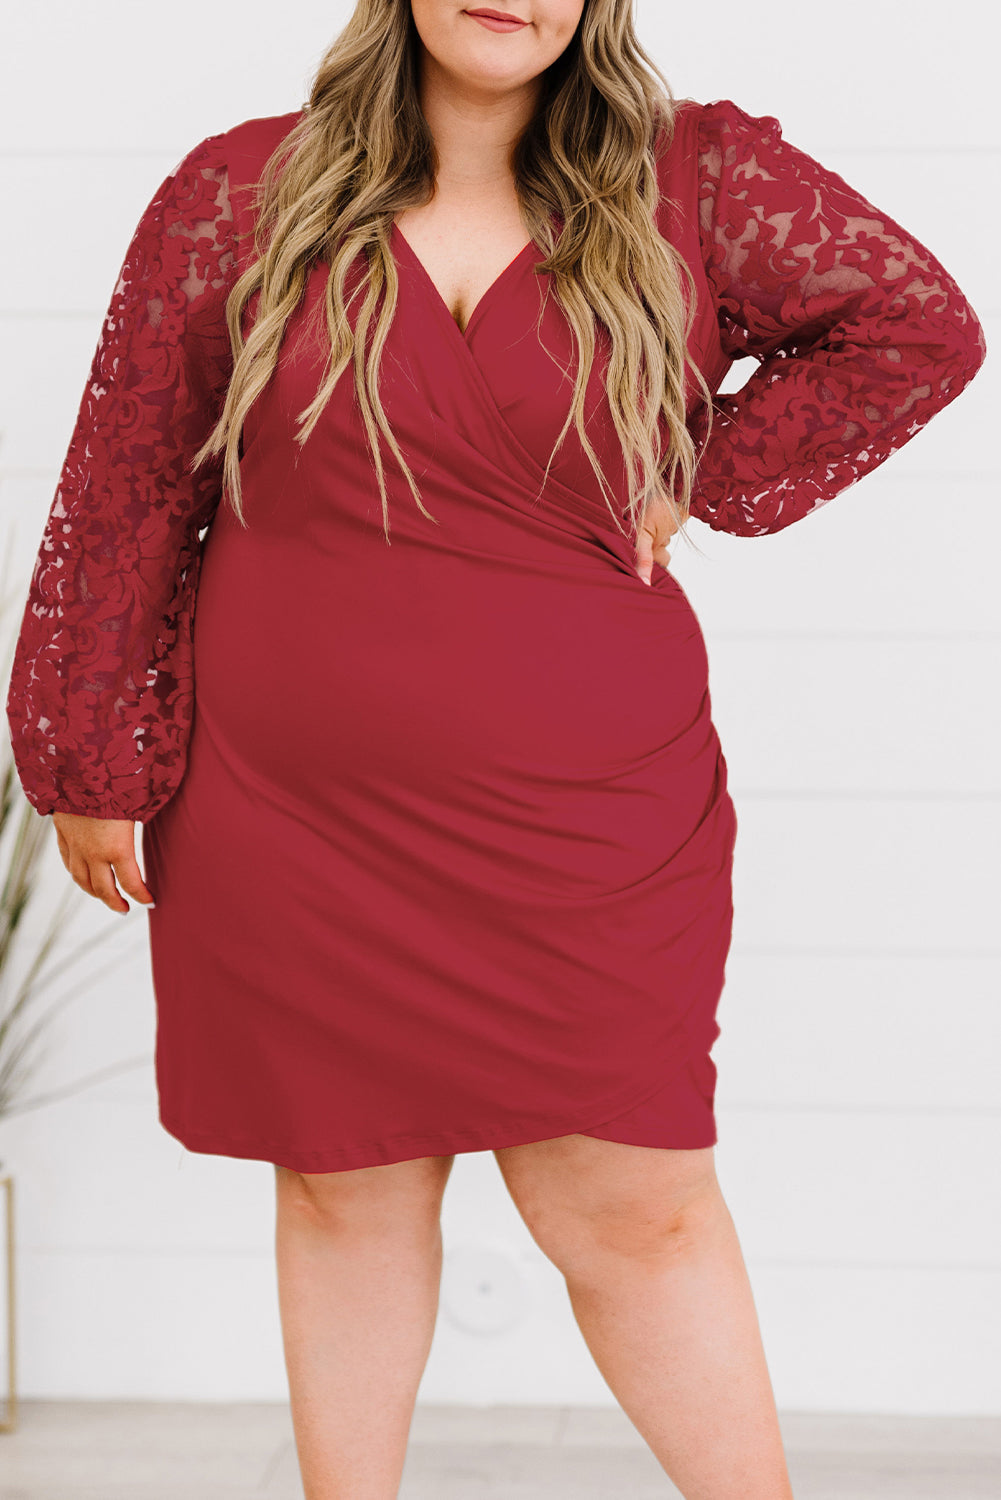 Red Surplice Neckline Floral Puff Sleeves Plus Size Dress